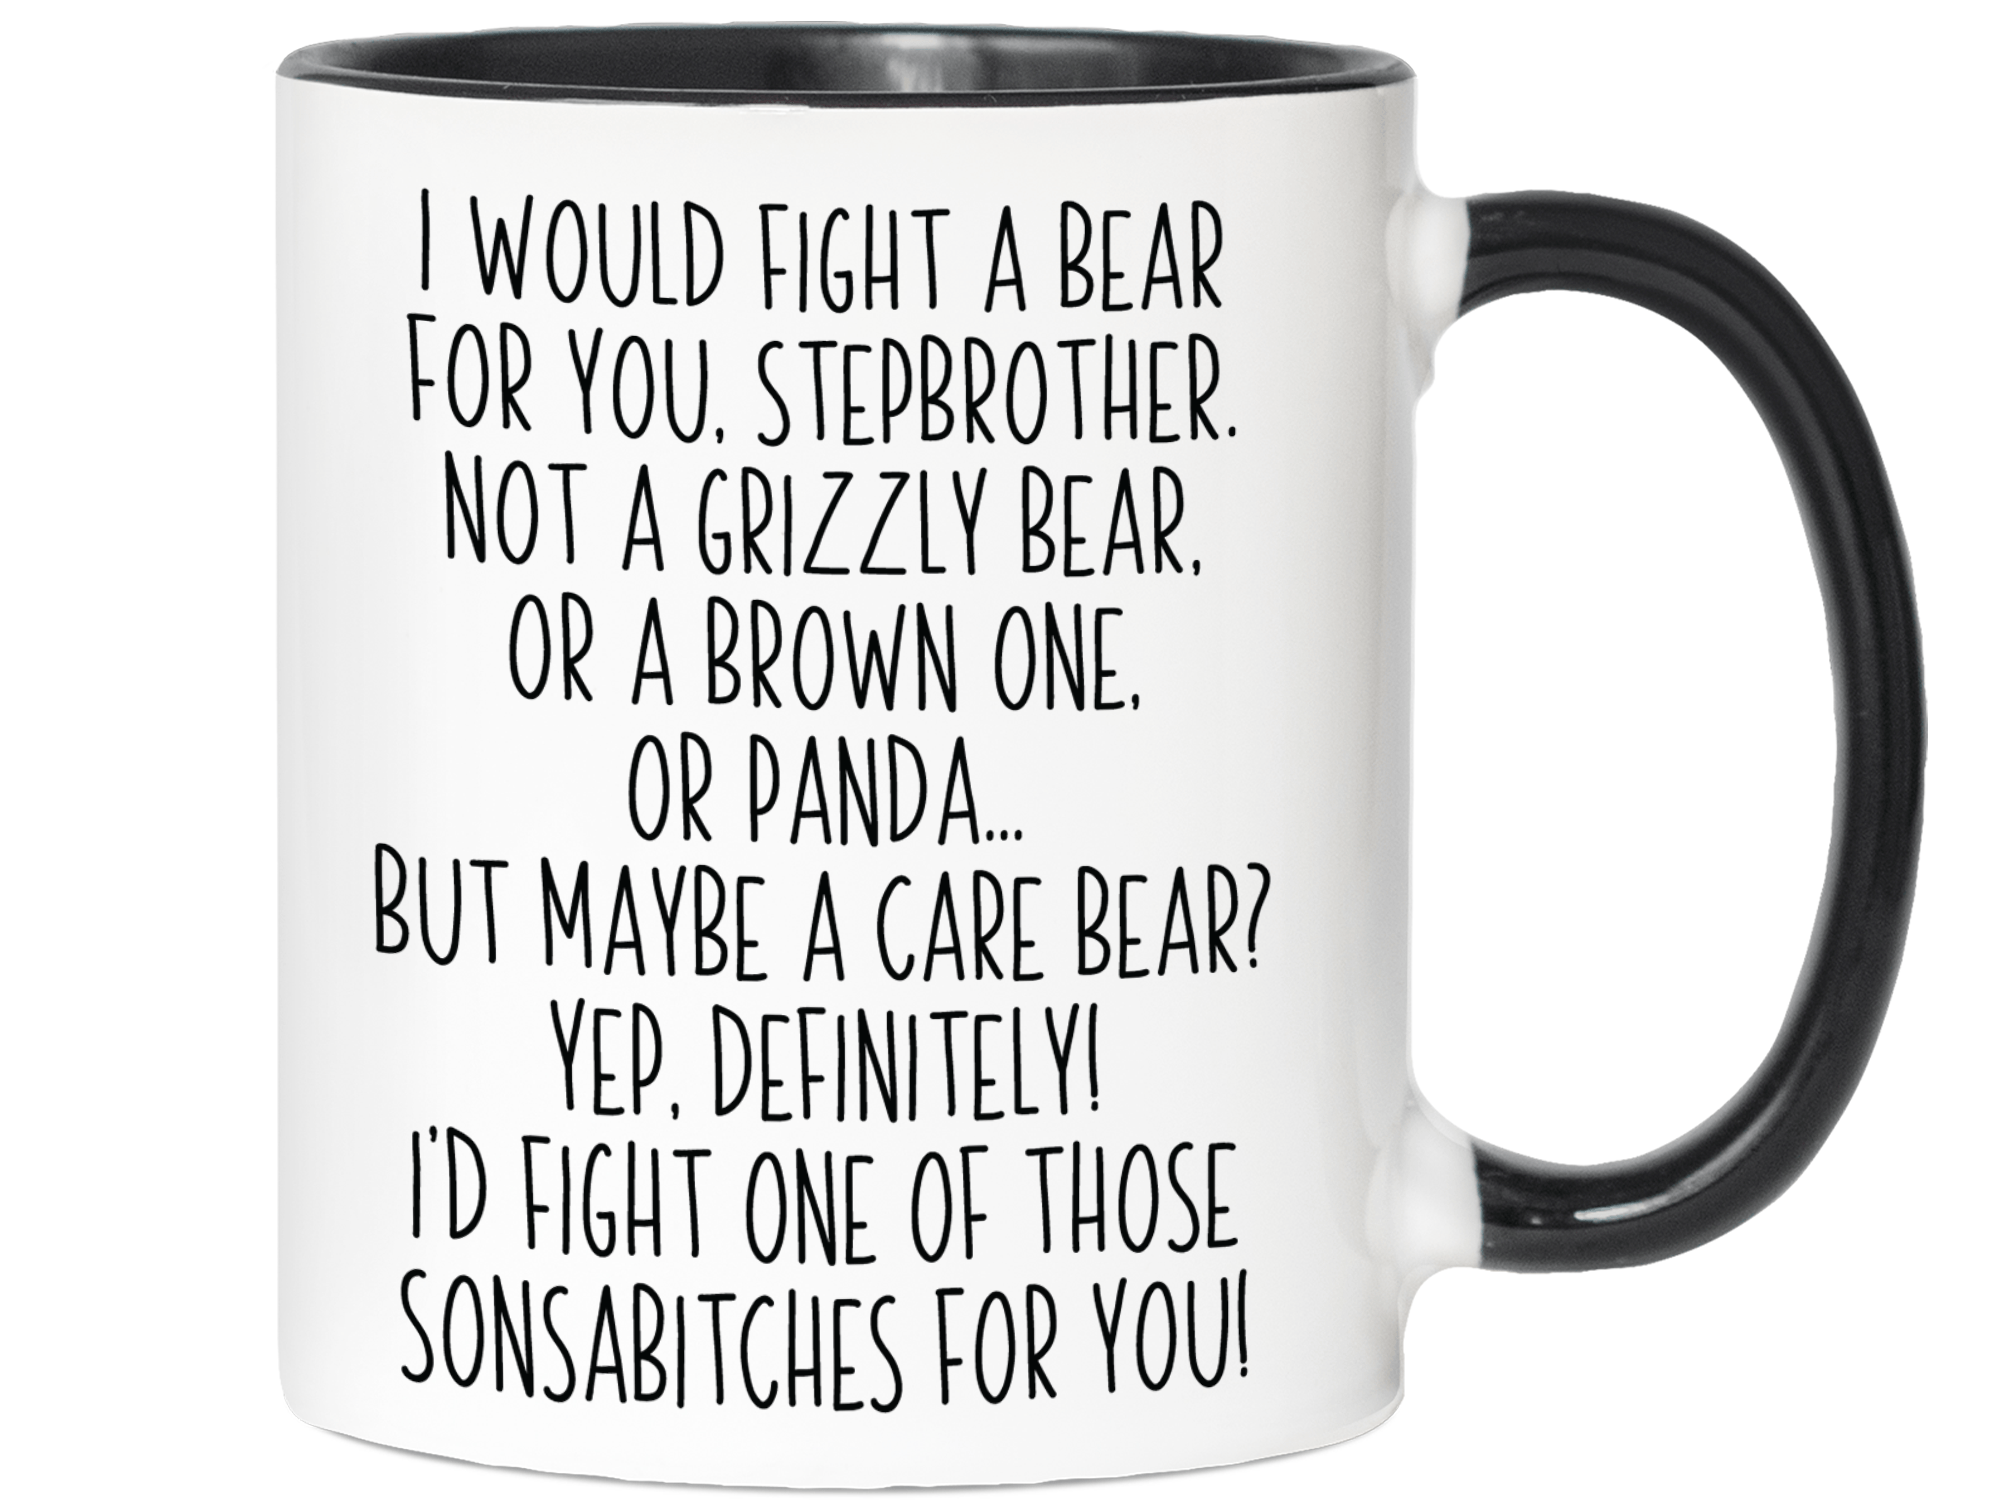 Funny Gifts for Stepbrothers - I Would Fight a Bear for You Stepbrother Gag Coffee Mug